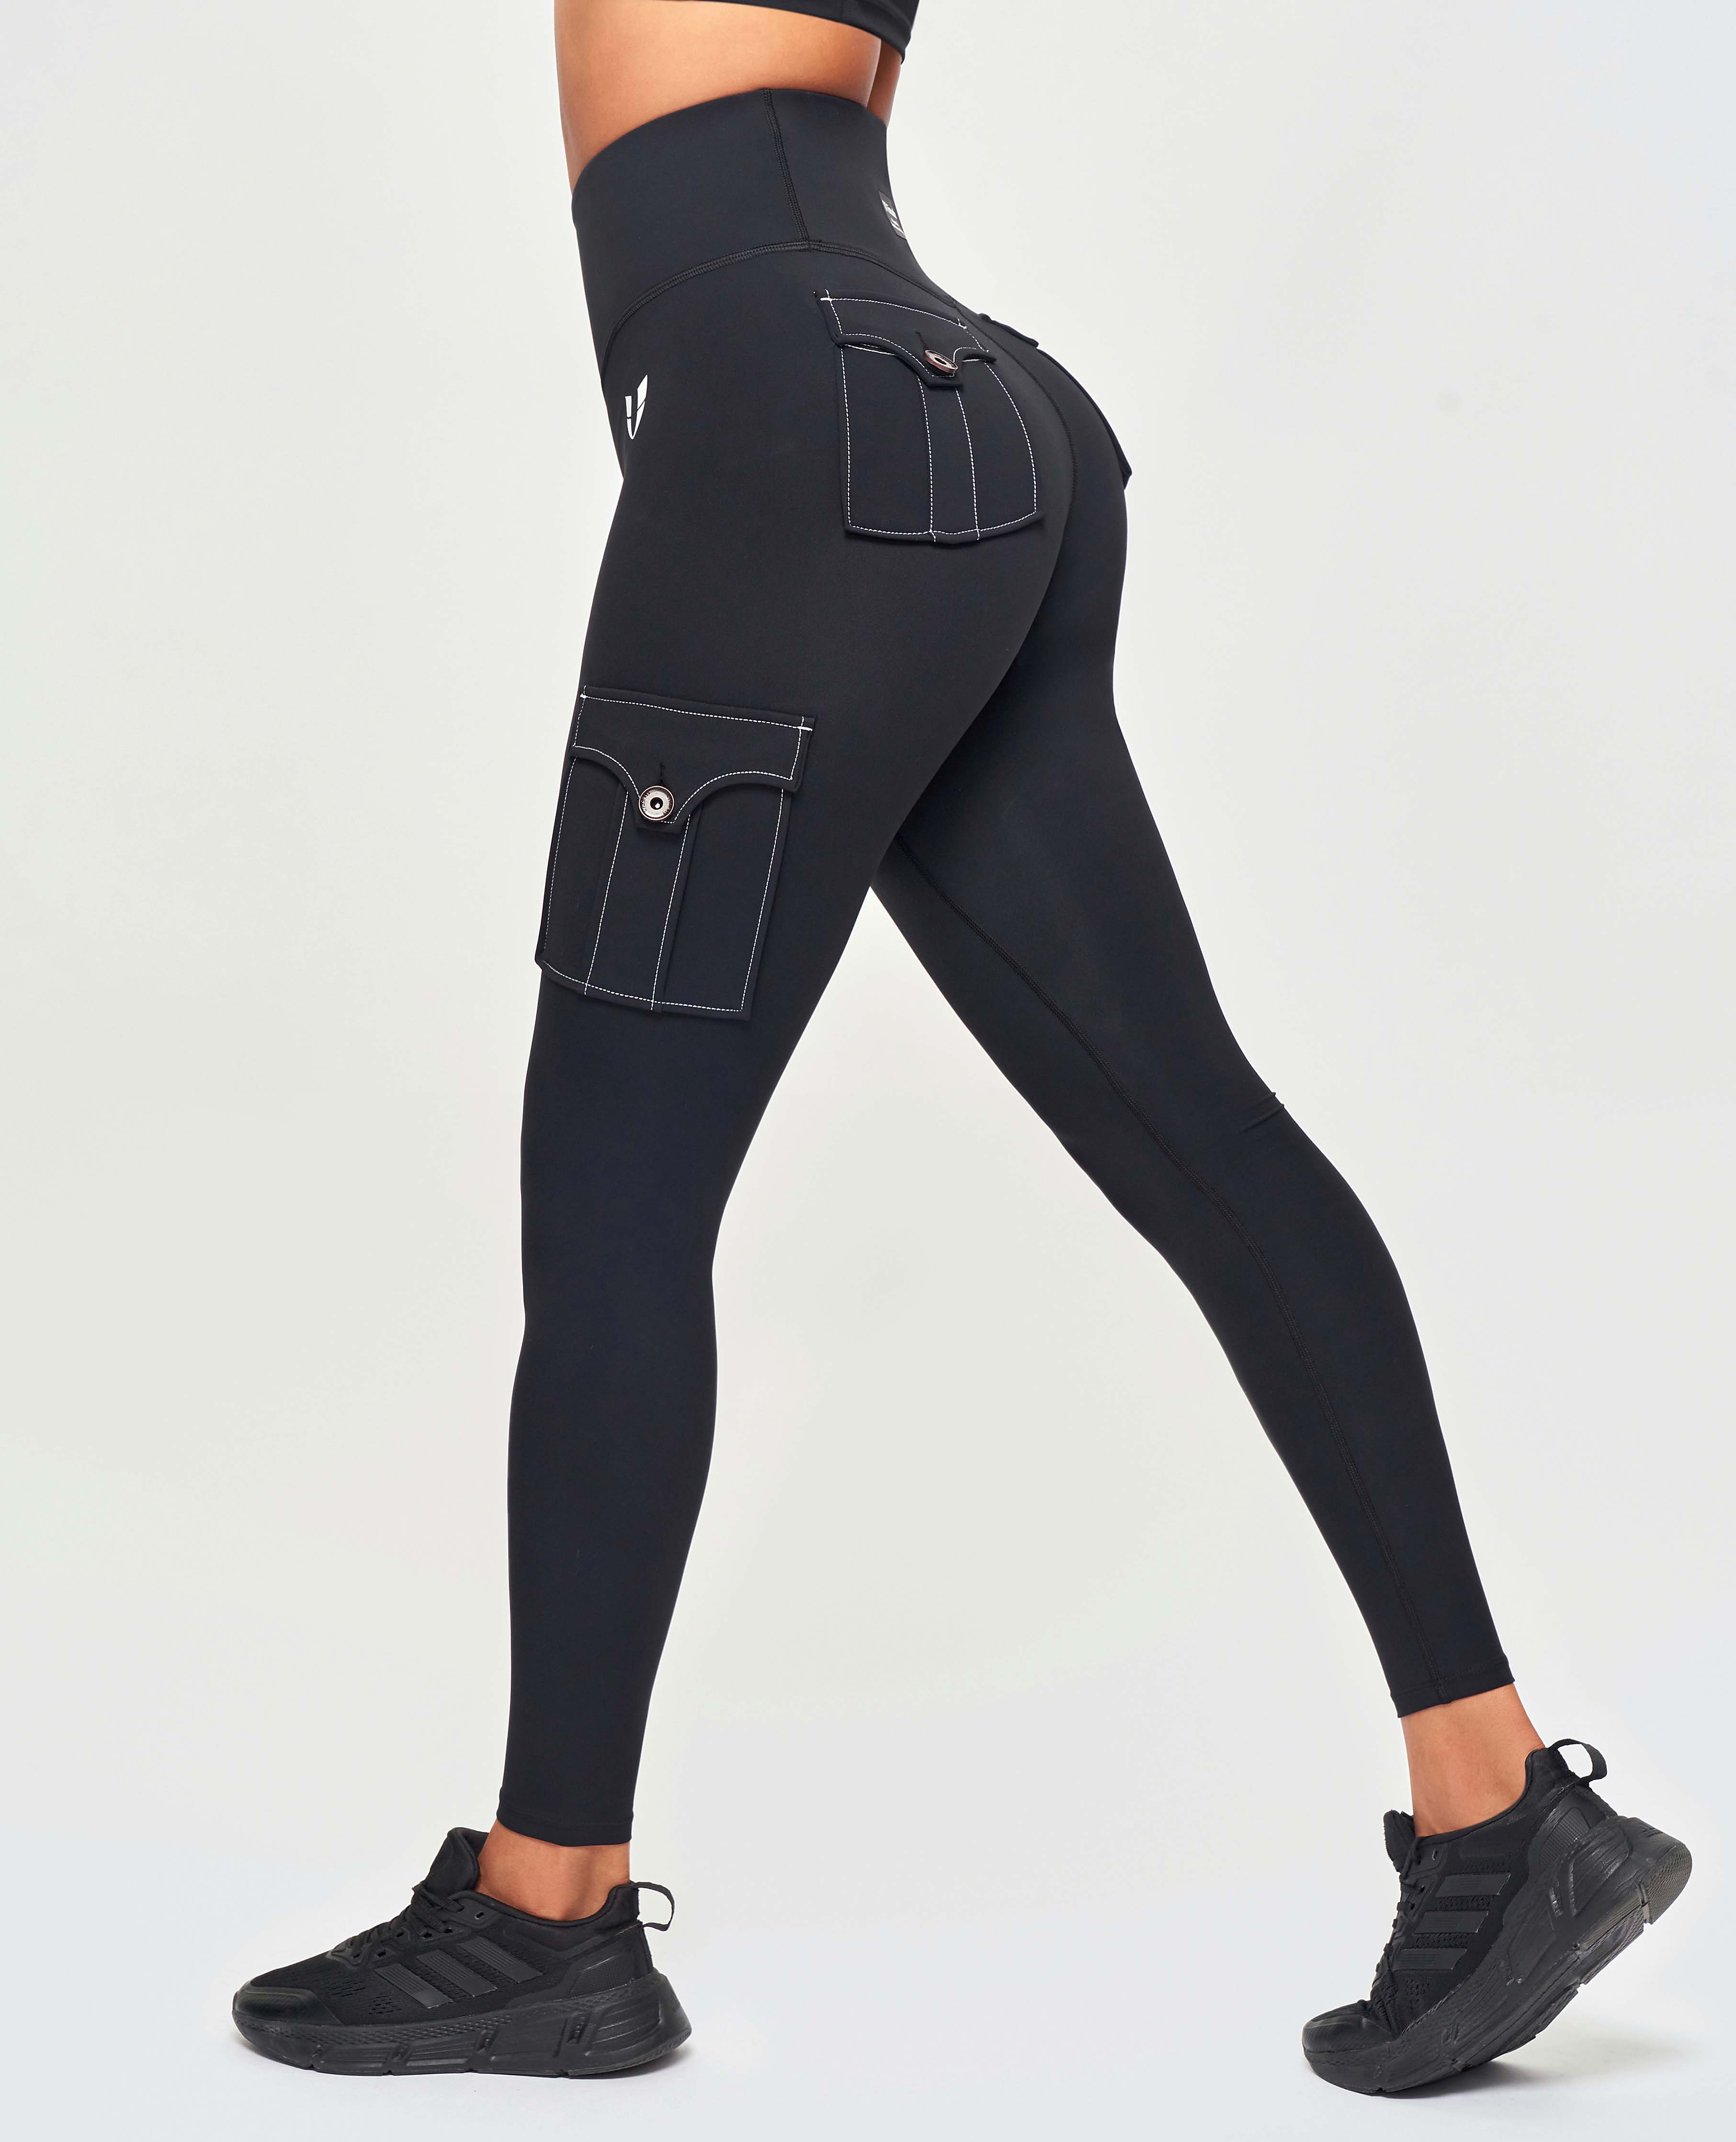 FIRMABS: Our Best Price Leggings, NEW ARRIVALS